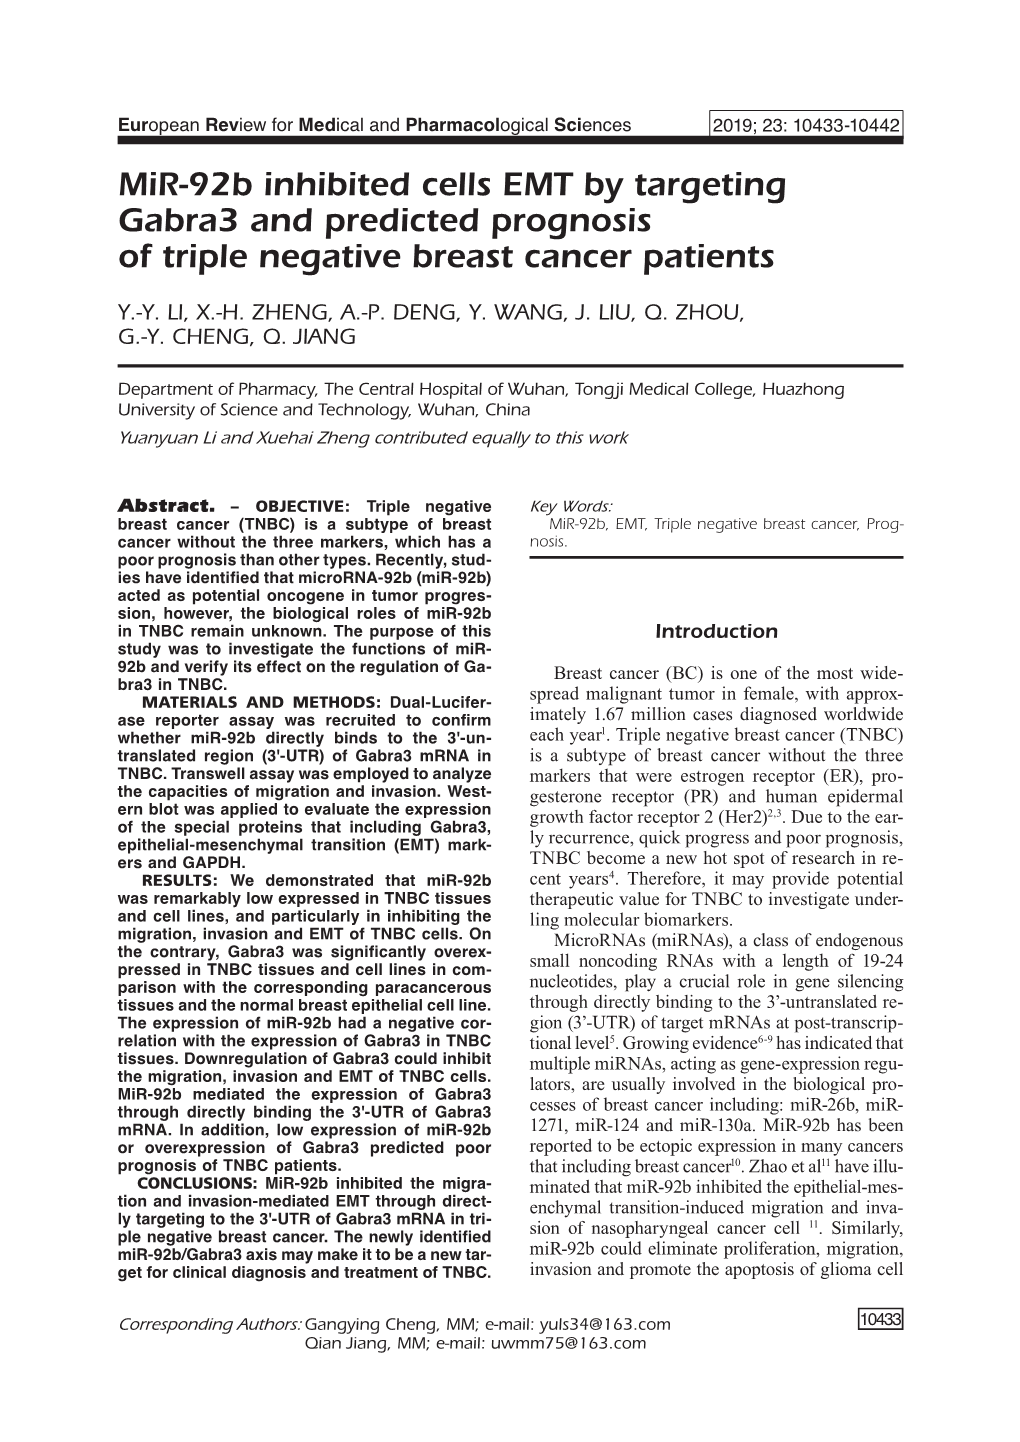 Mir-92B Inhibited Cells EMT by Targeting Gabra3 and Predicted Prognosis of Triple Negative Breast Cancer Patients